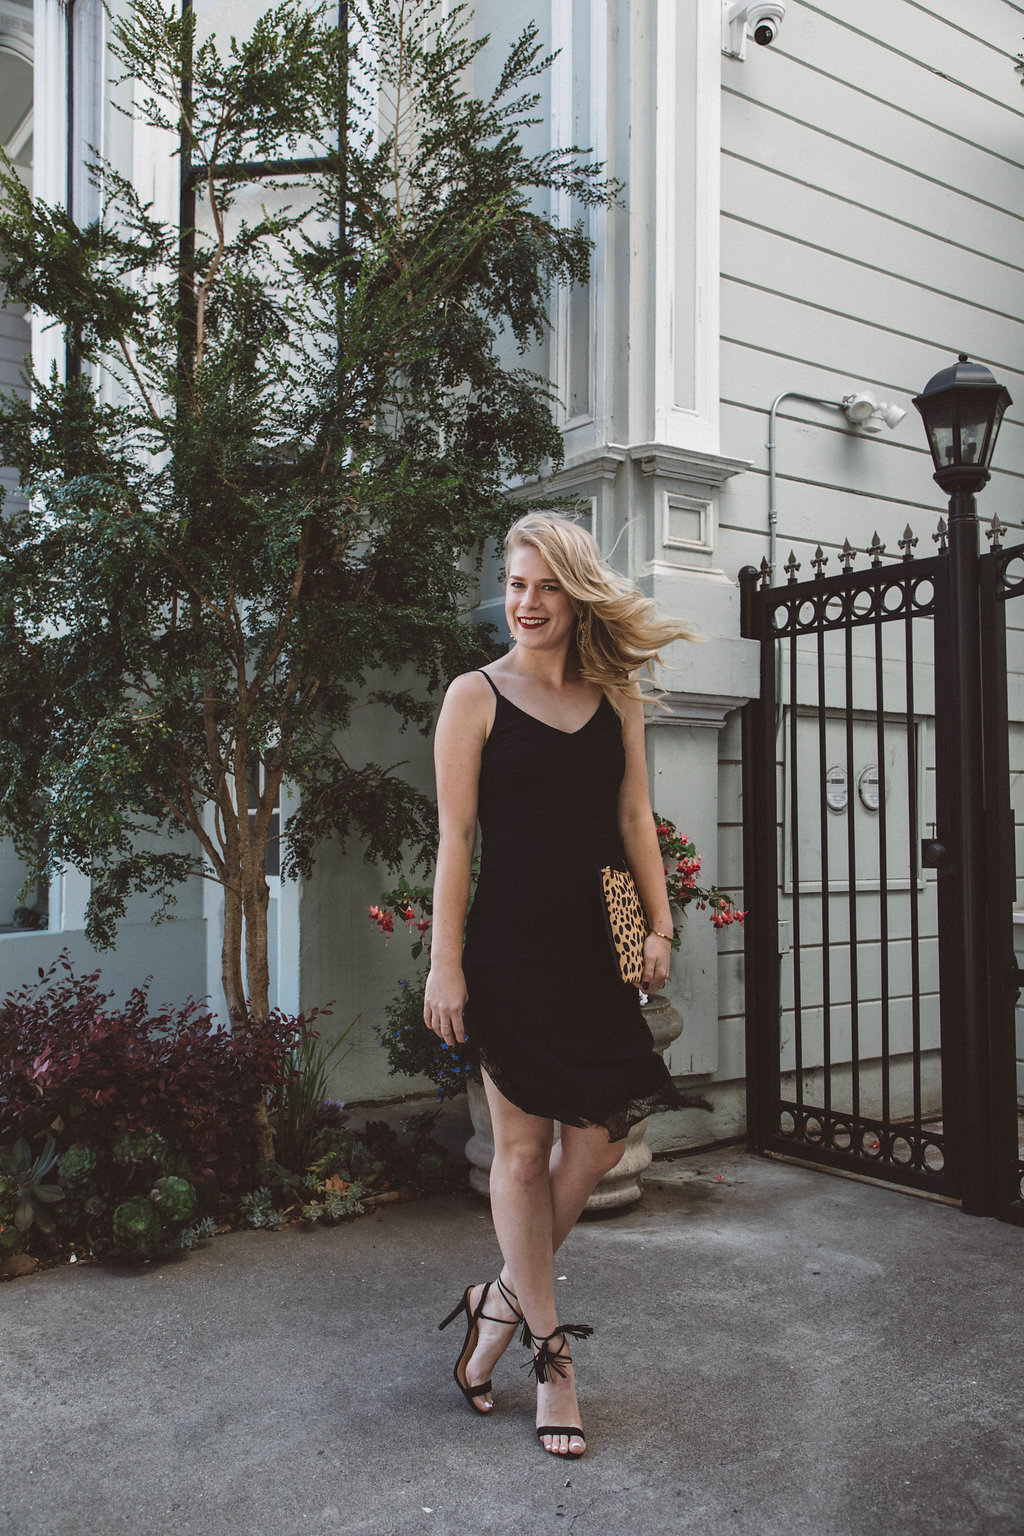 The Black Slip Dress // This Leith black slip dress is both classic and sexy and costs under $30!